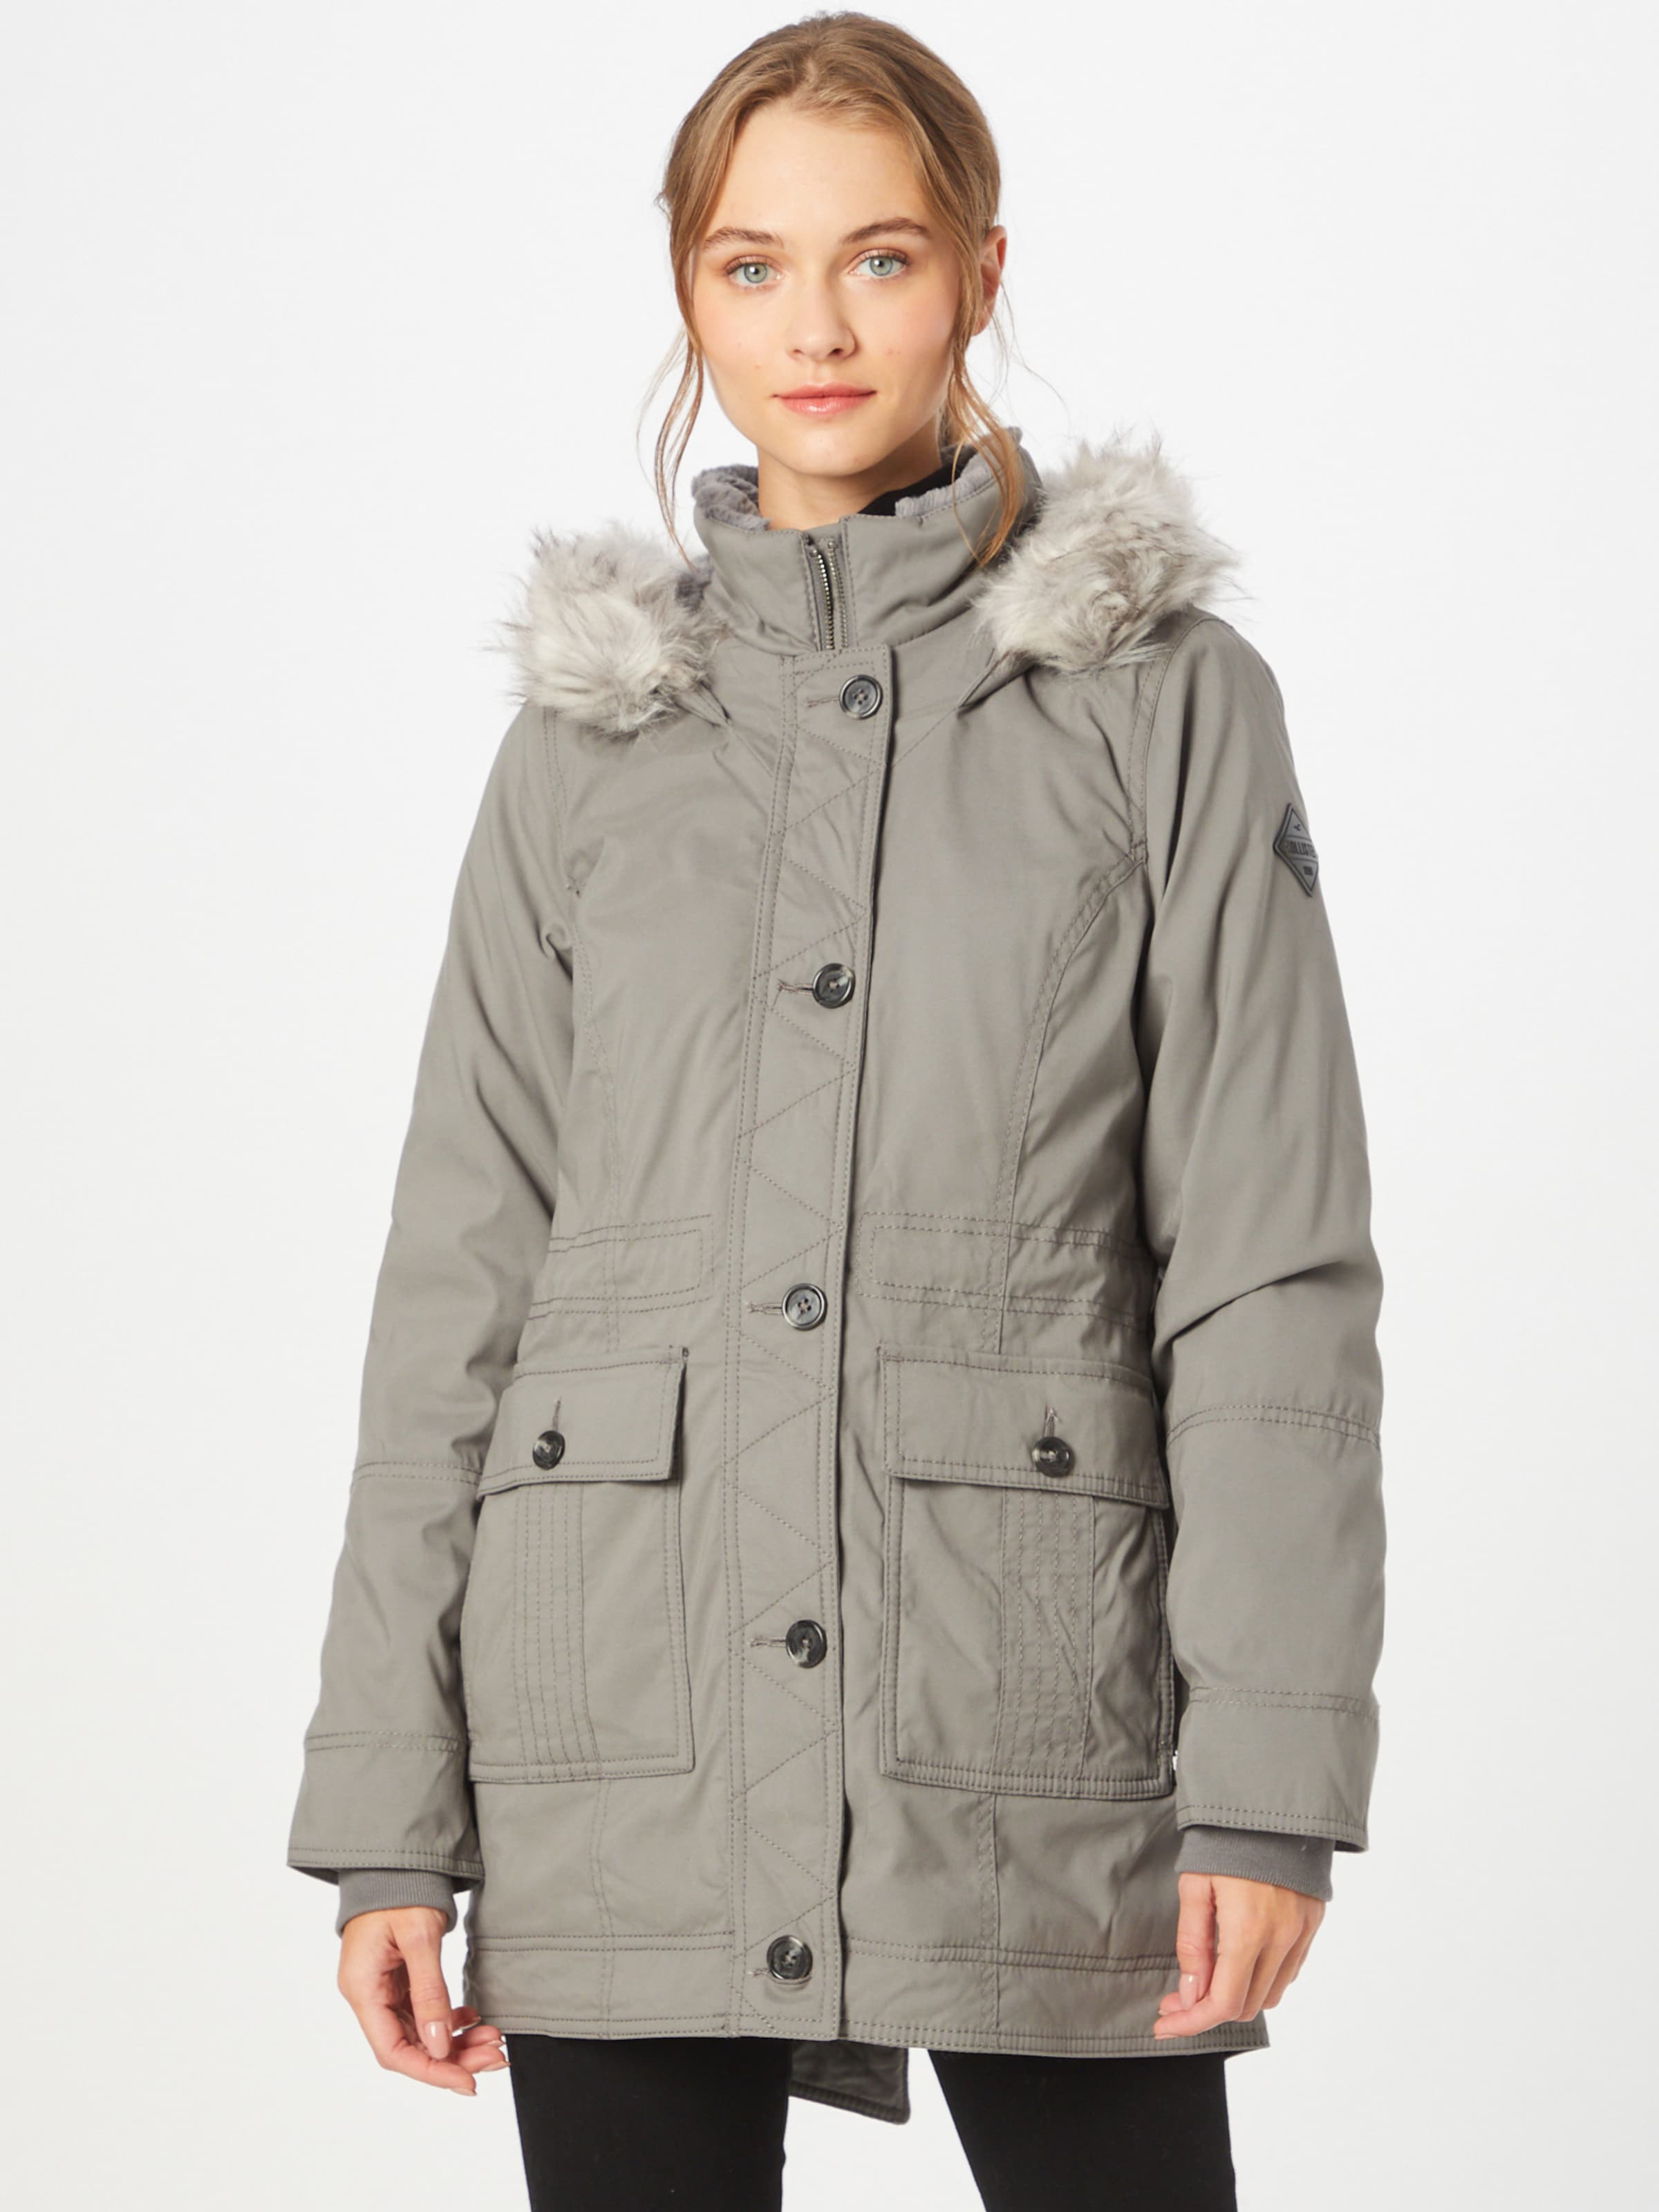 Hollister Teddy Lined Parka Jacket With Faux Fur Hood In Grey for